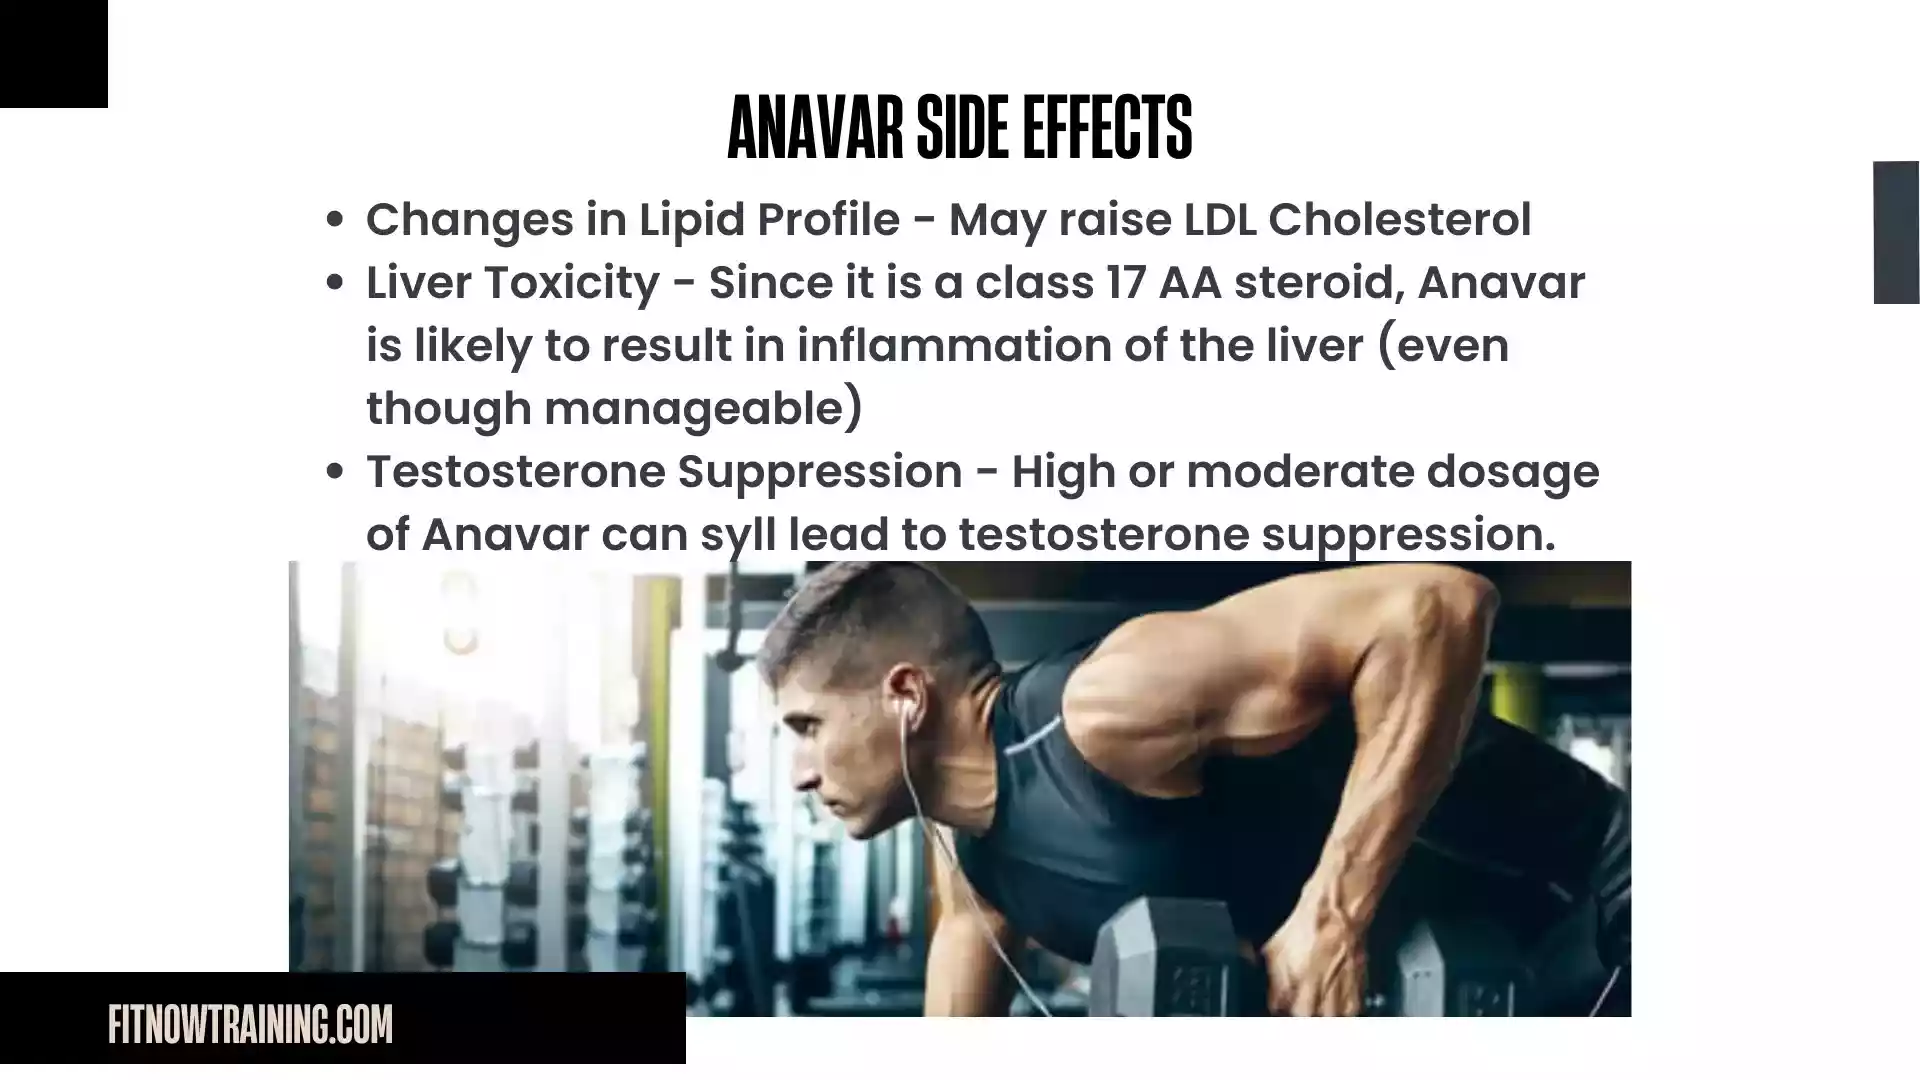 Anavar side effects